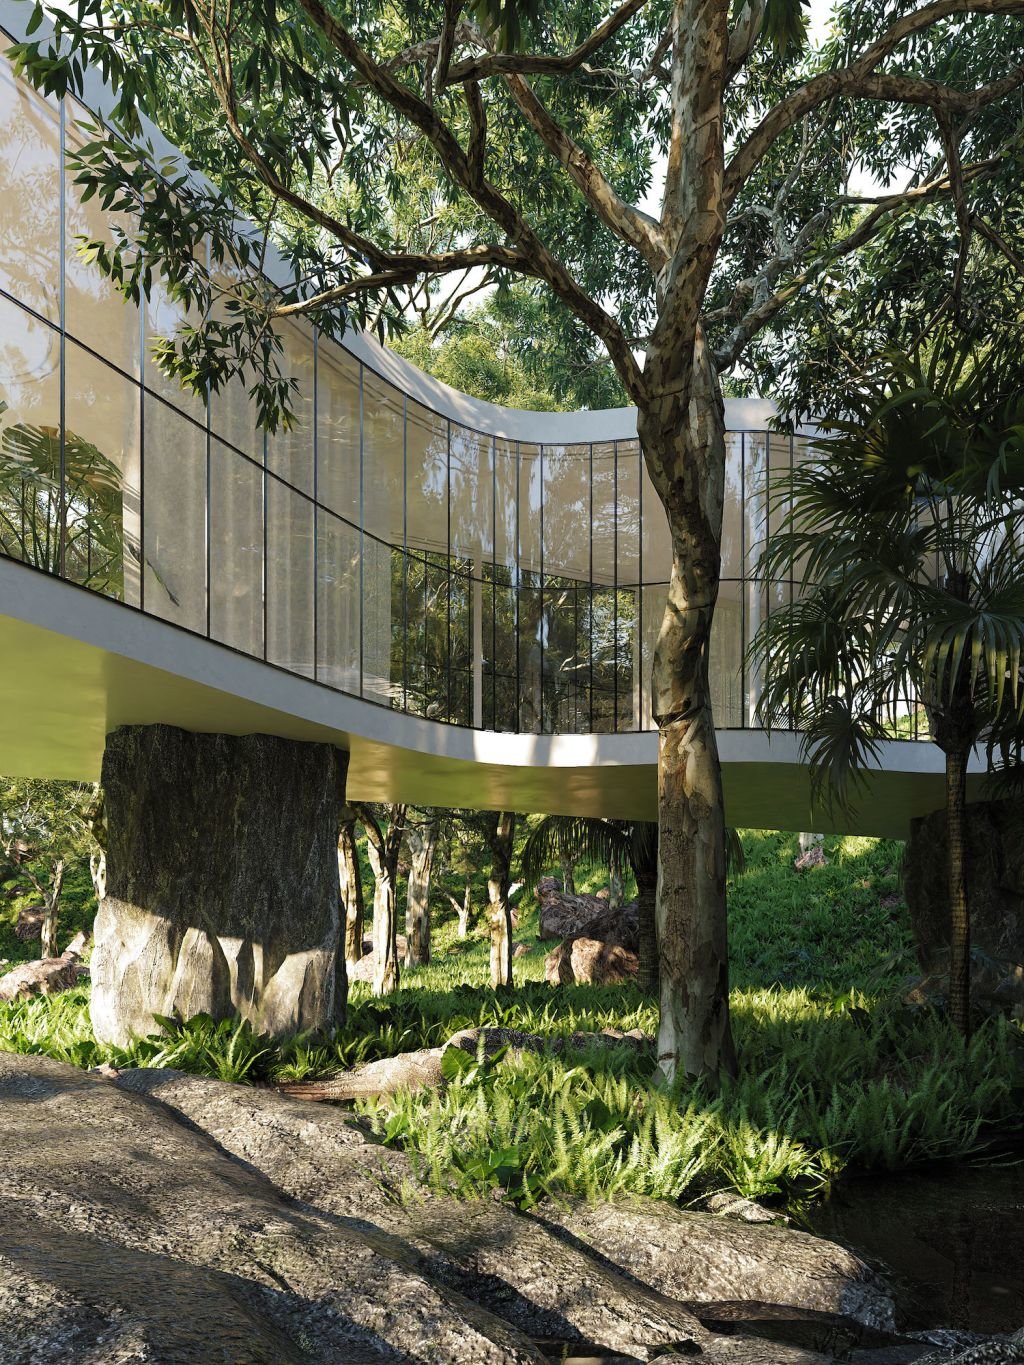 This modernist jungle home offers the escapism we need